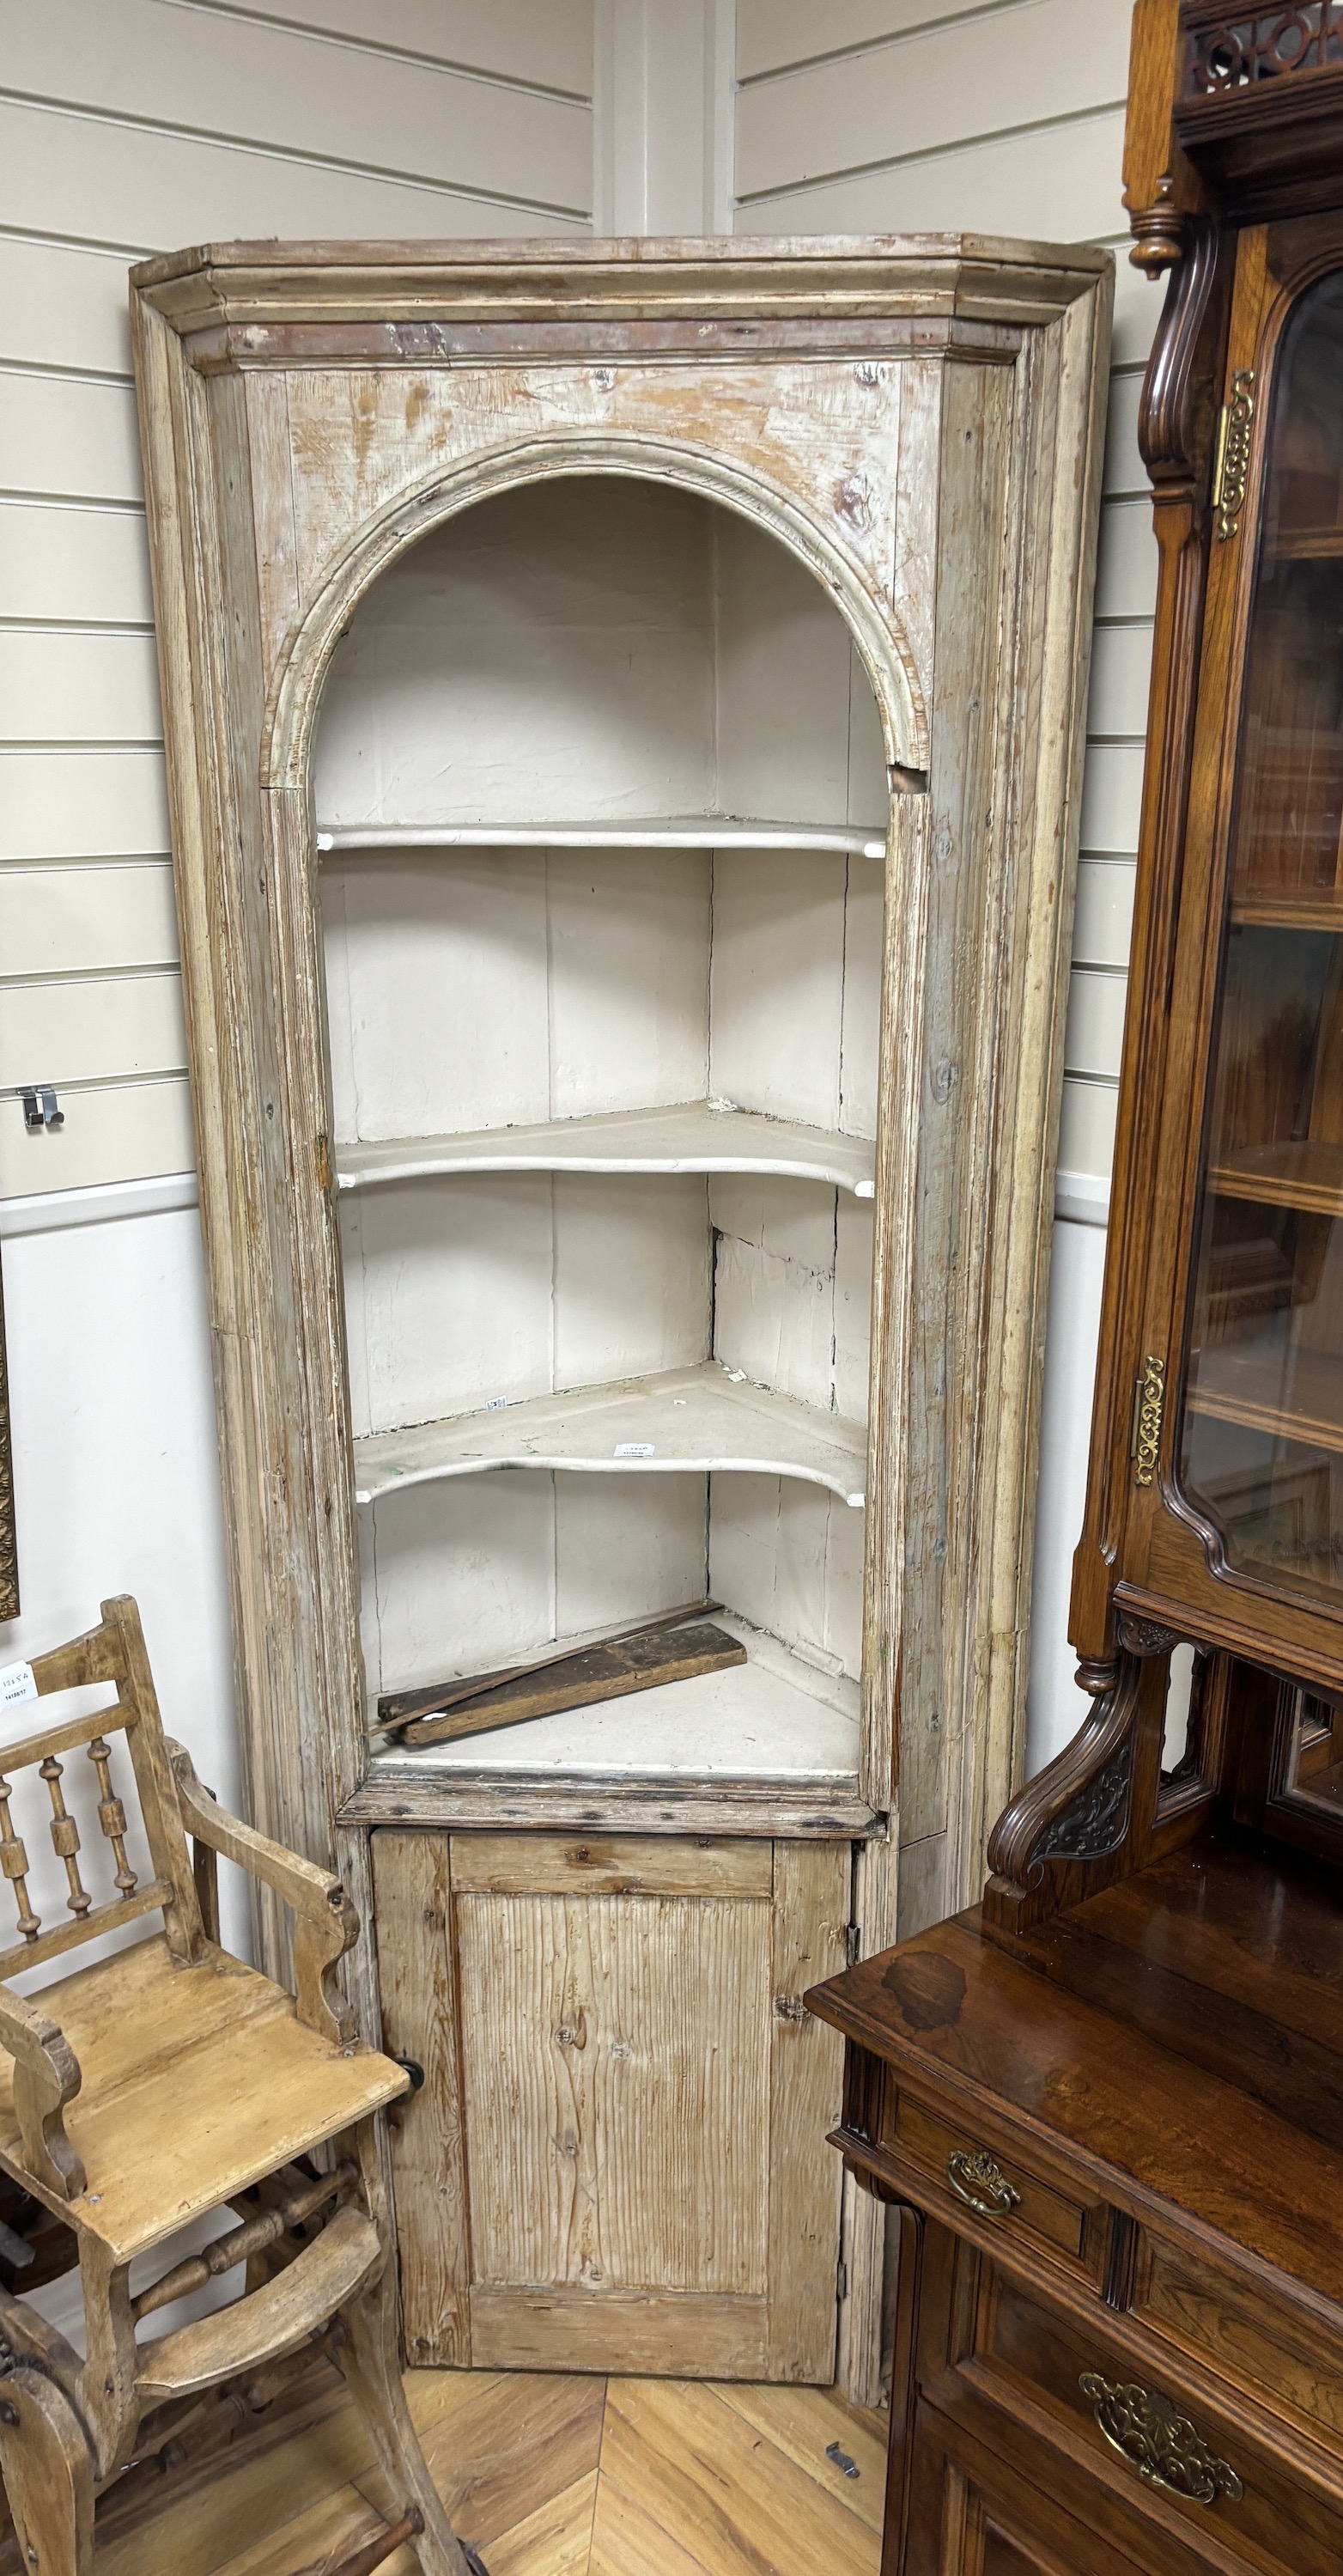 A 19th century pine standing corner cupboard, width 82cm, depth 42cm, height 210cm. Condition - poor, Provenance- Brede Place, East Sussex, a former residence of the Frewen family from 1712-1936.